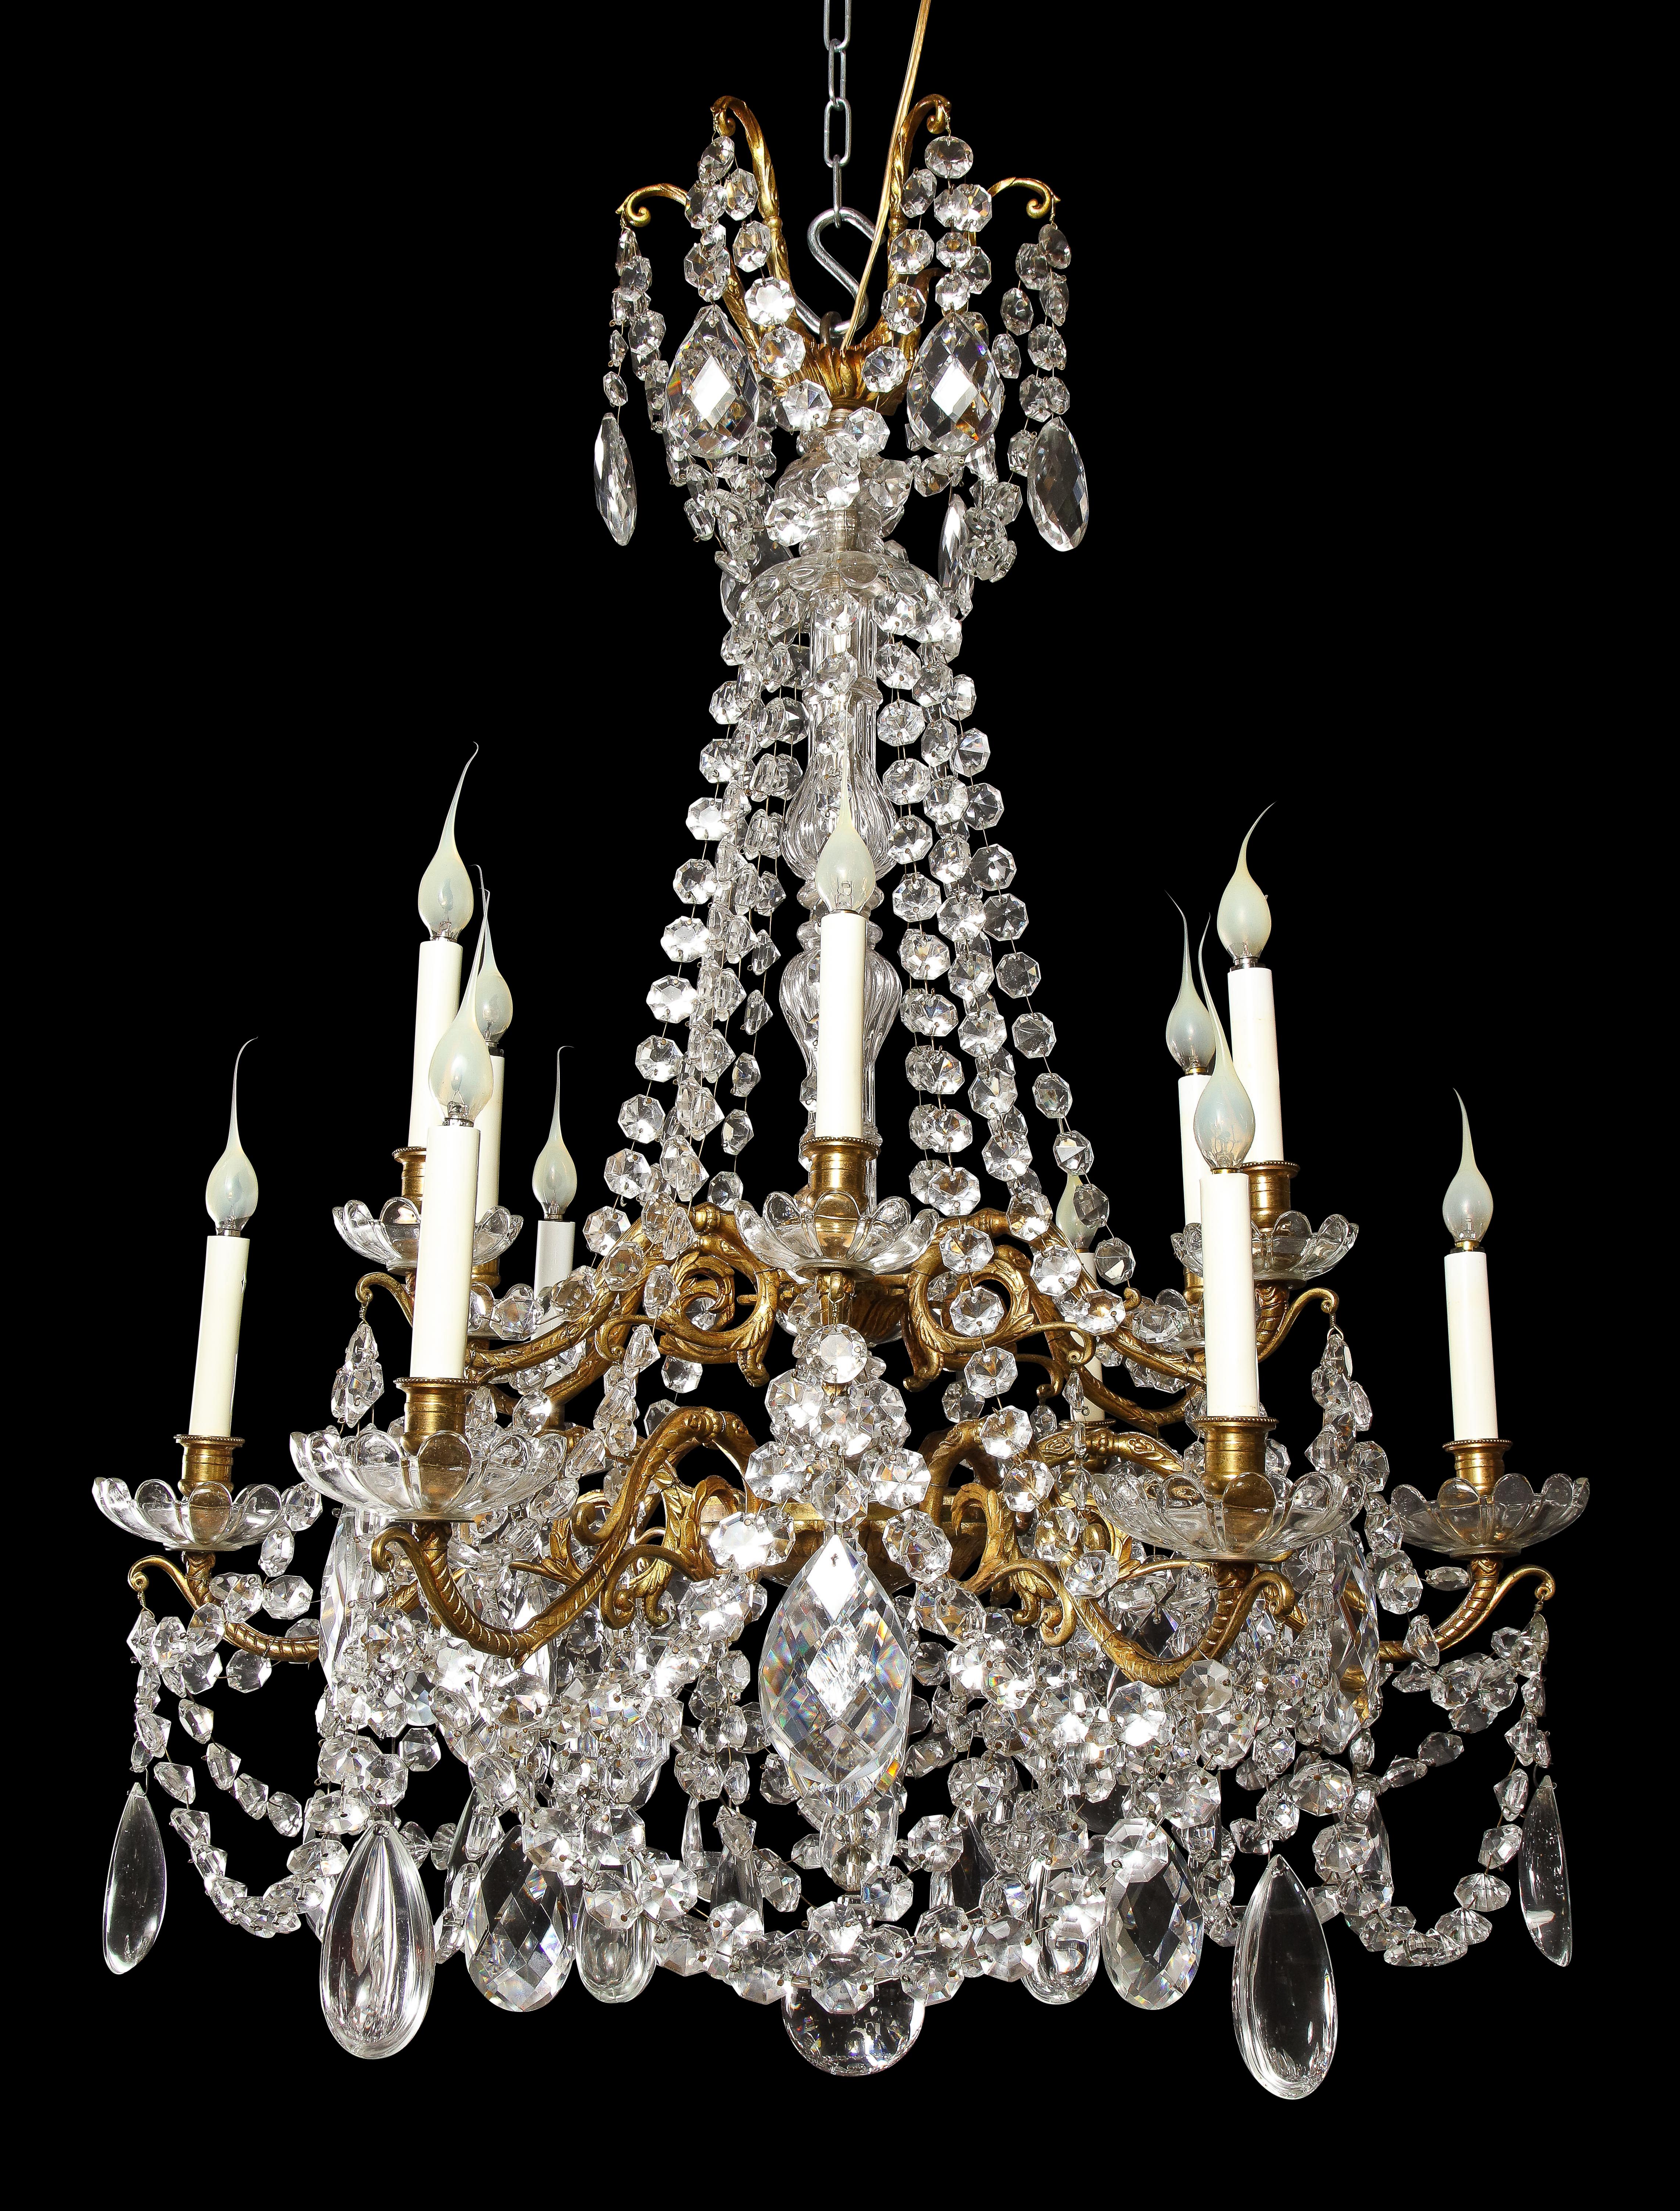 Pressed Large Antique French Louis XVI Style Gilt Bronze and Cut Crystal Chandelier